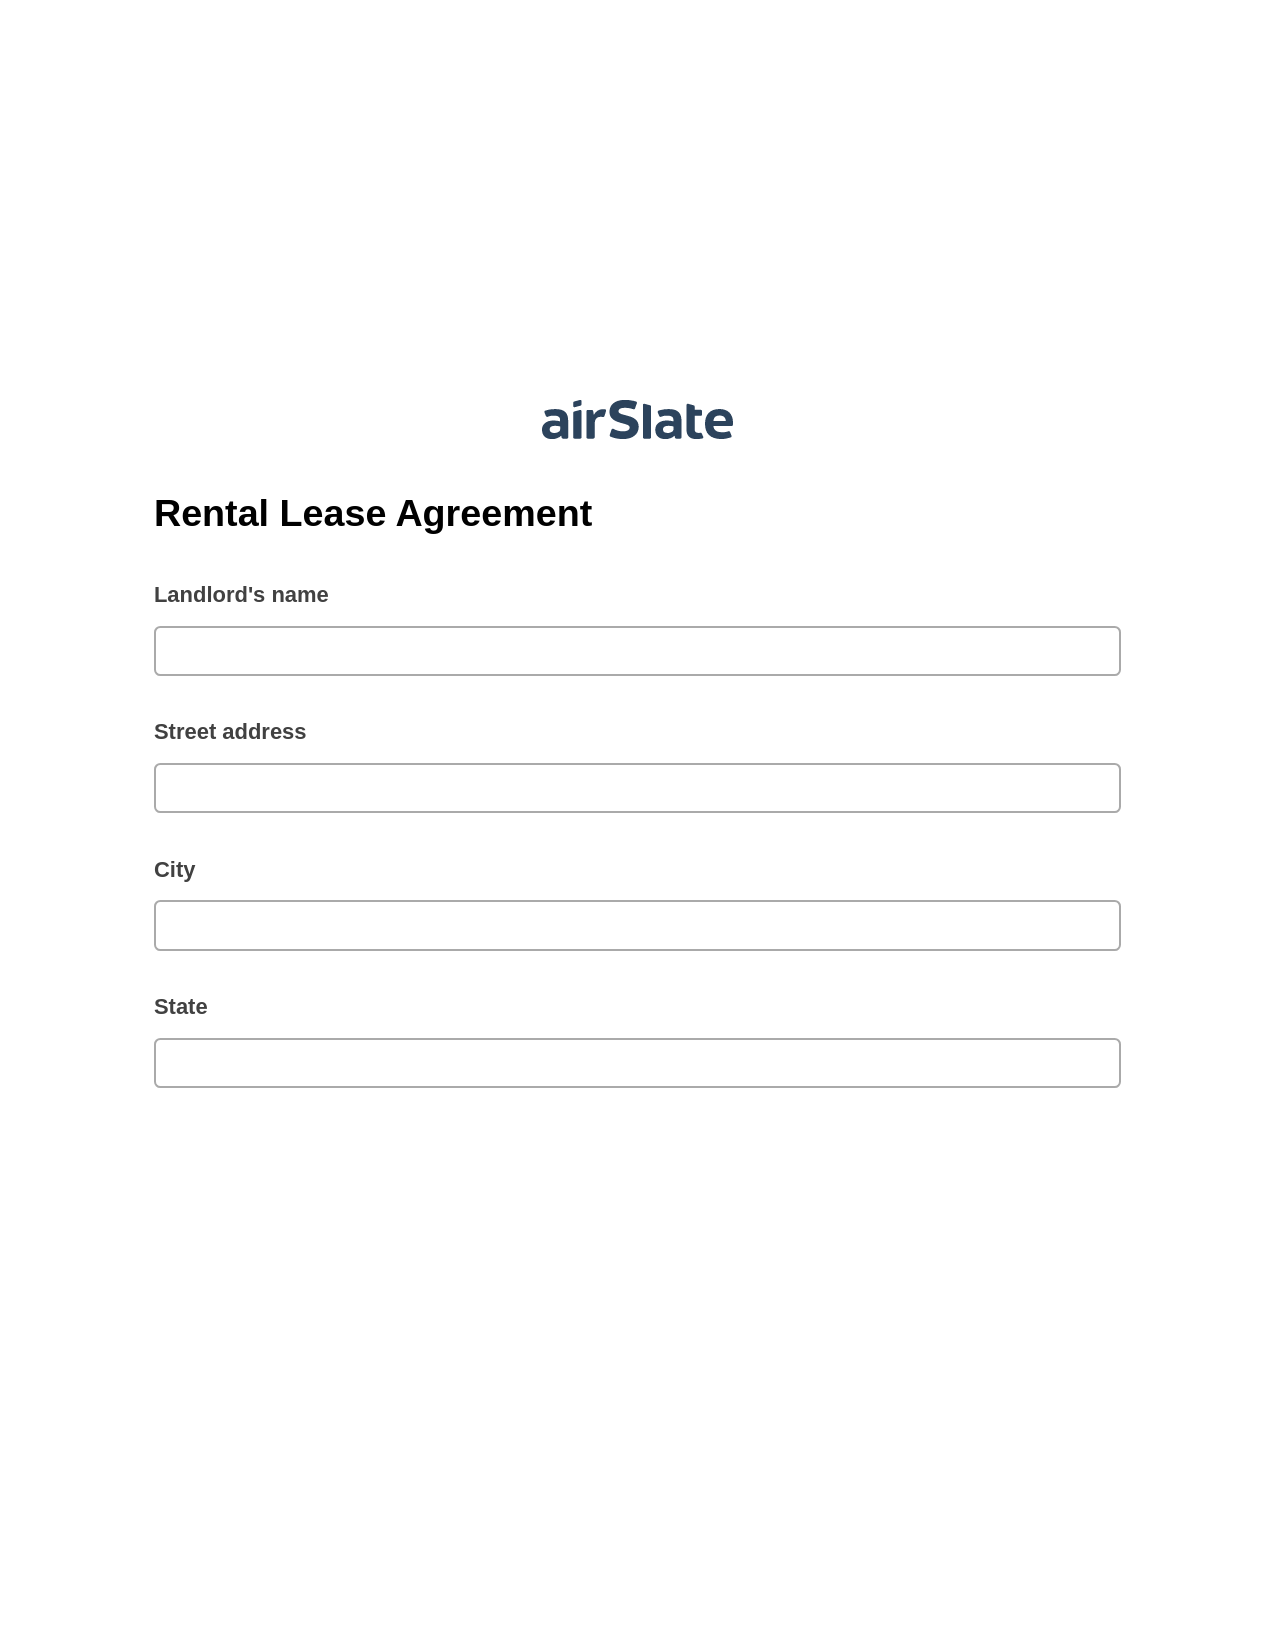 Rental Lease Agreement Pre-fill from CSV File Dropdown Options Bot, System Bot - Create a Slate in another Flow, Export to MySQL Bot